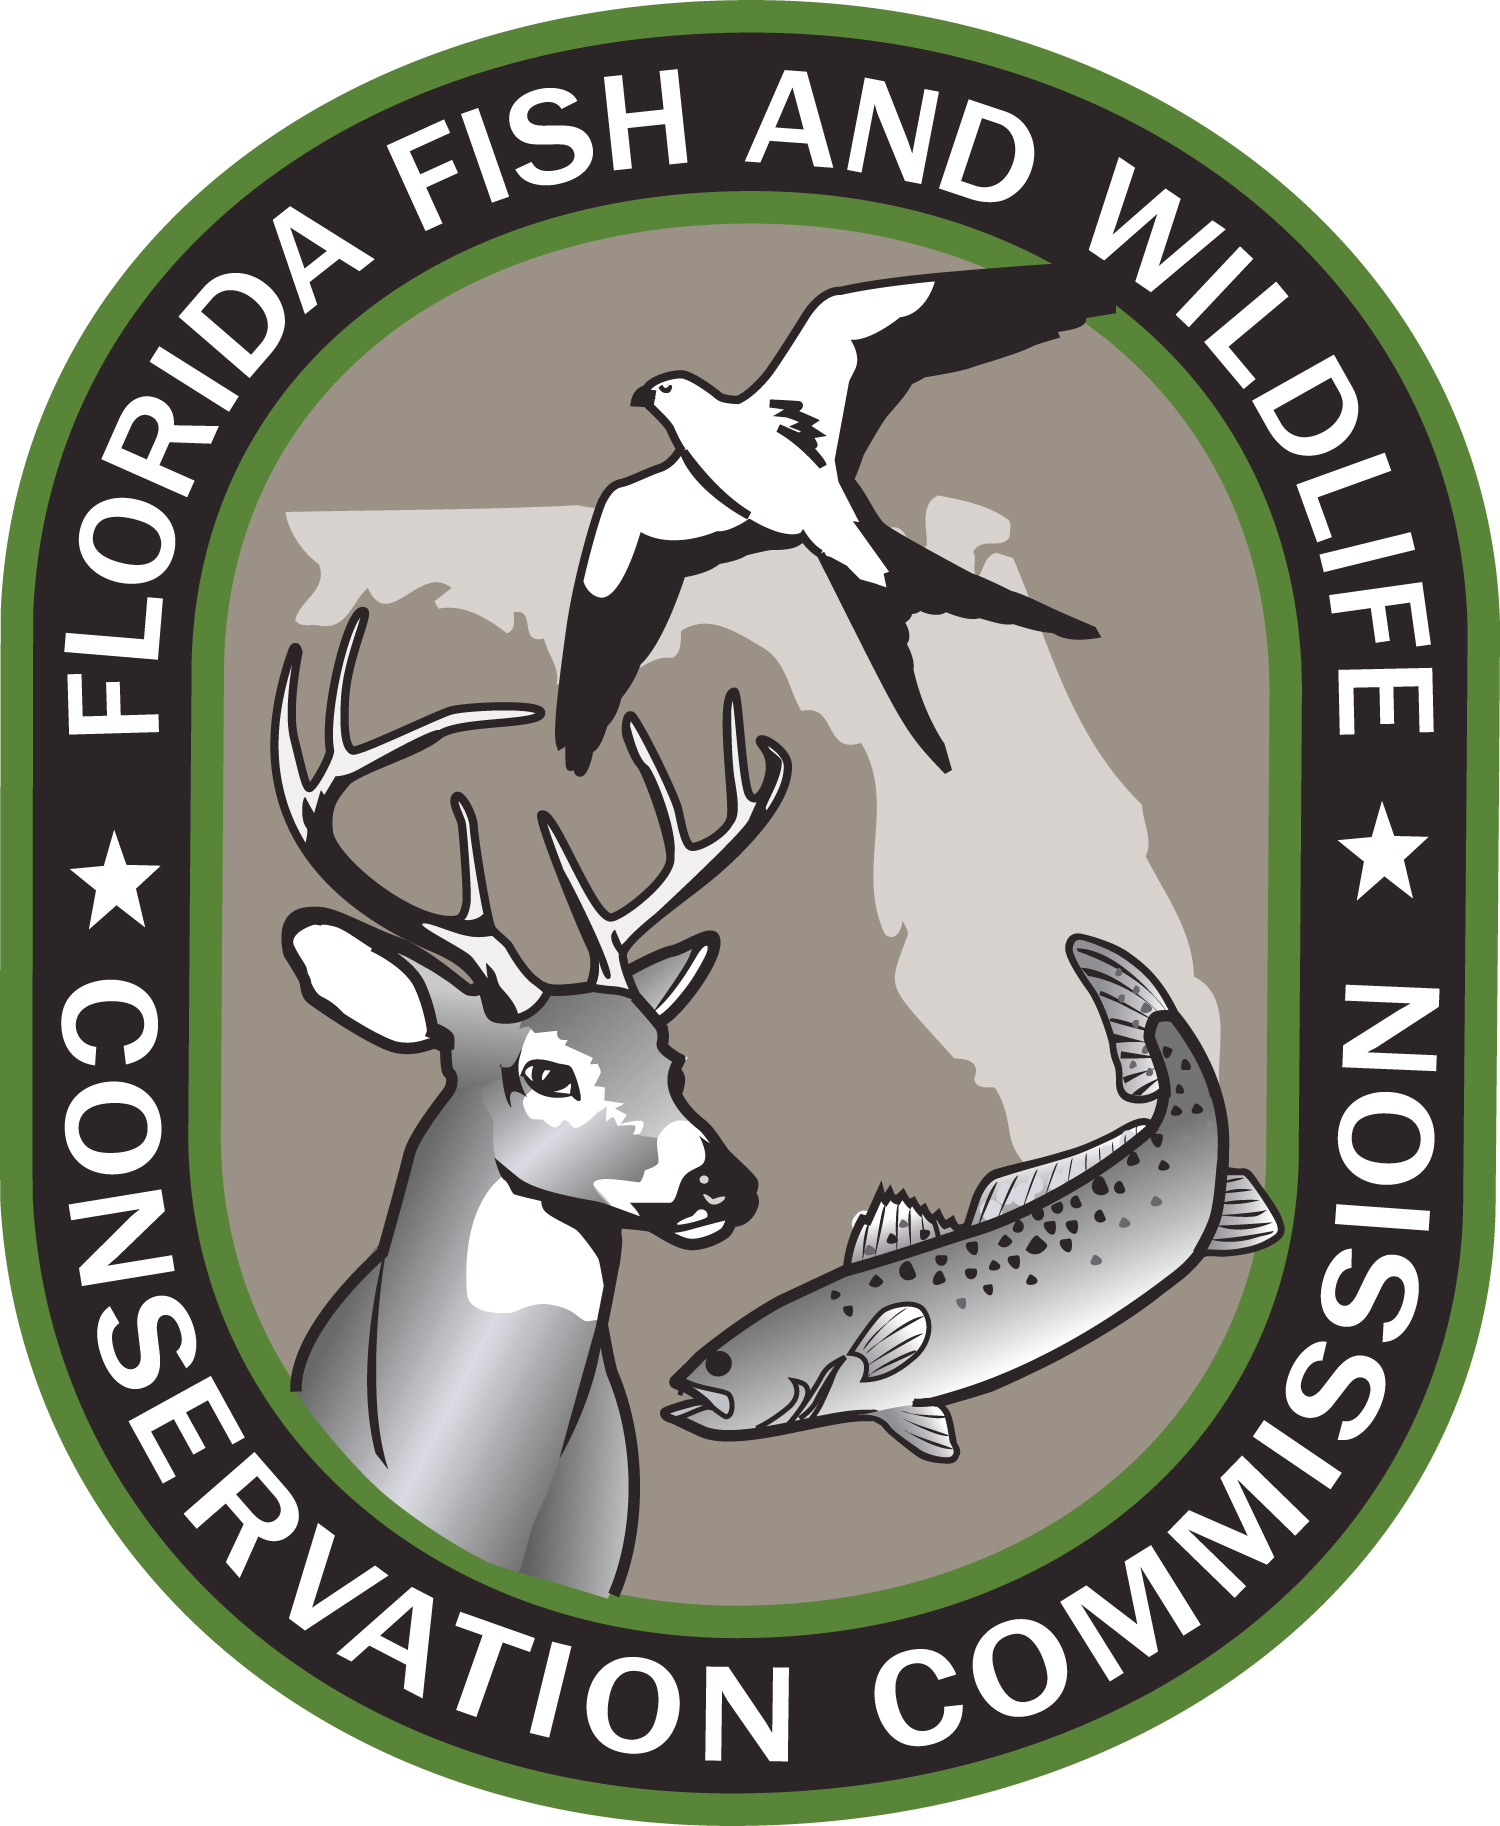 Florida Fish and Wildlife Conservation Commission - Wikipedia